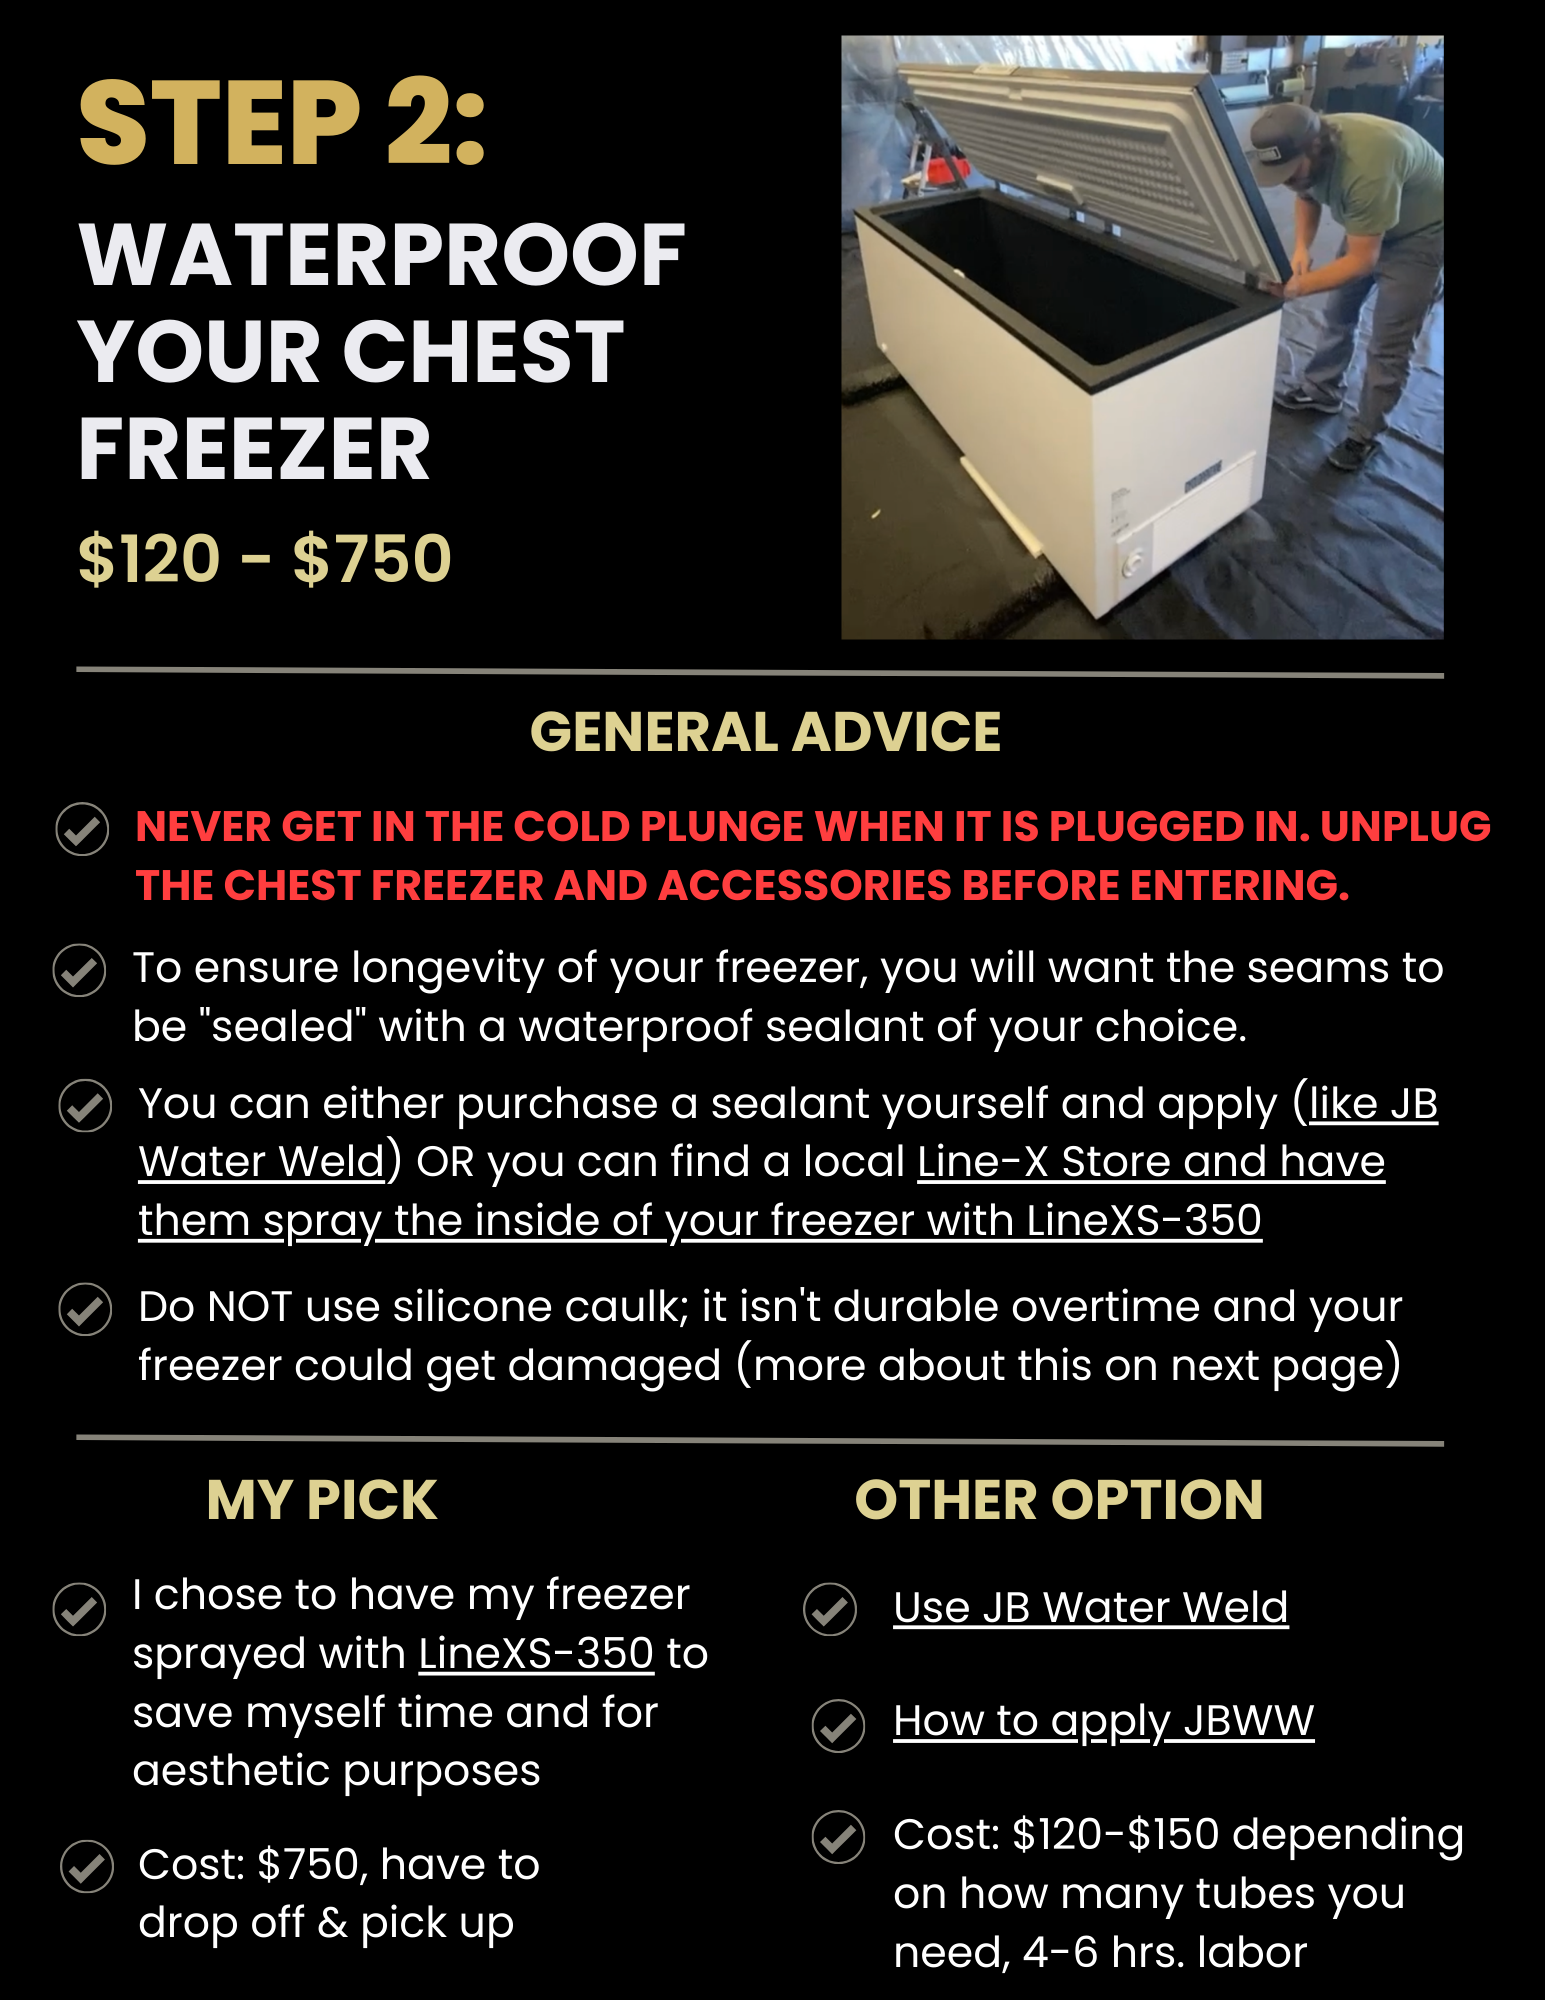 So you want to build a DIY chest freezer ice bath?